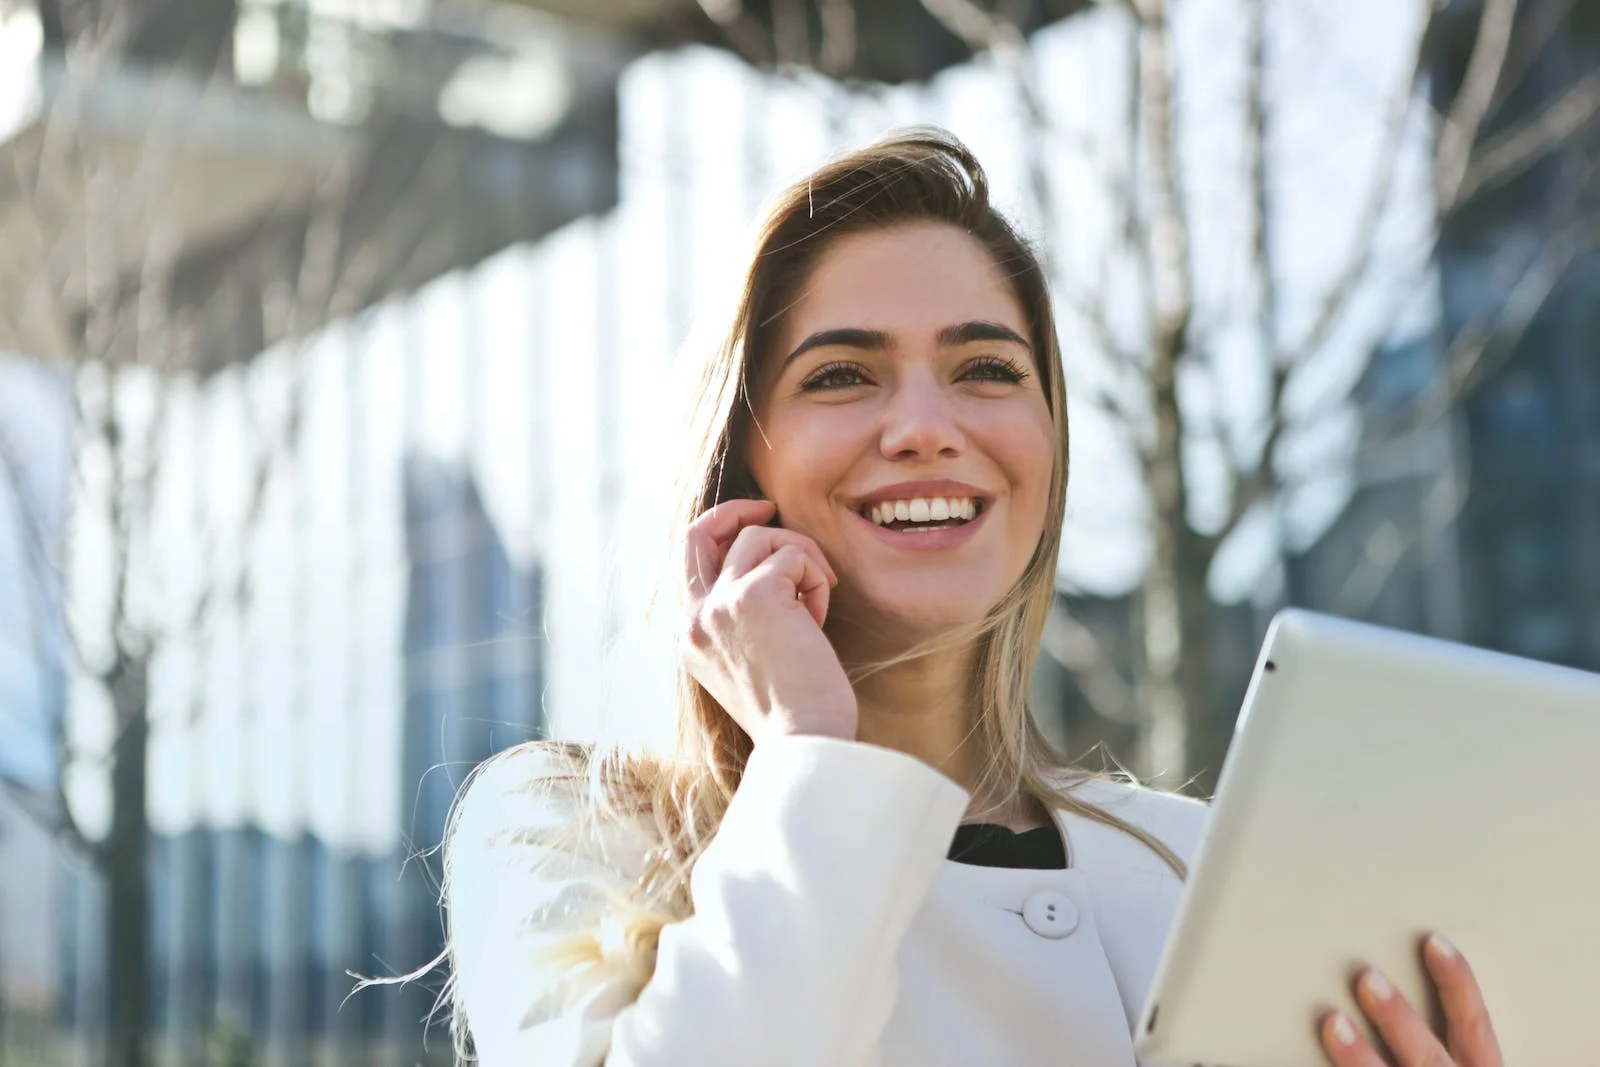 This is a picture of a blonde white woman talking on a cellphone and holding a tablet. (source https://www.pexels.com/search/career/)